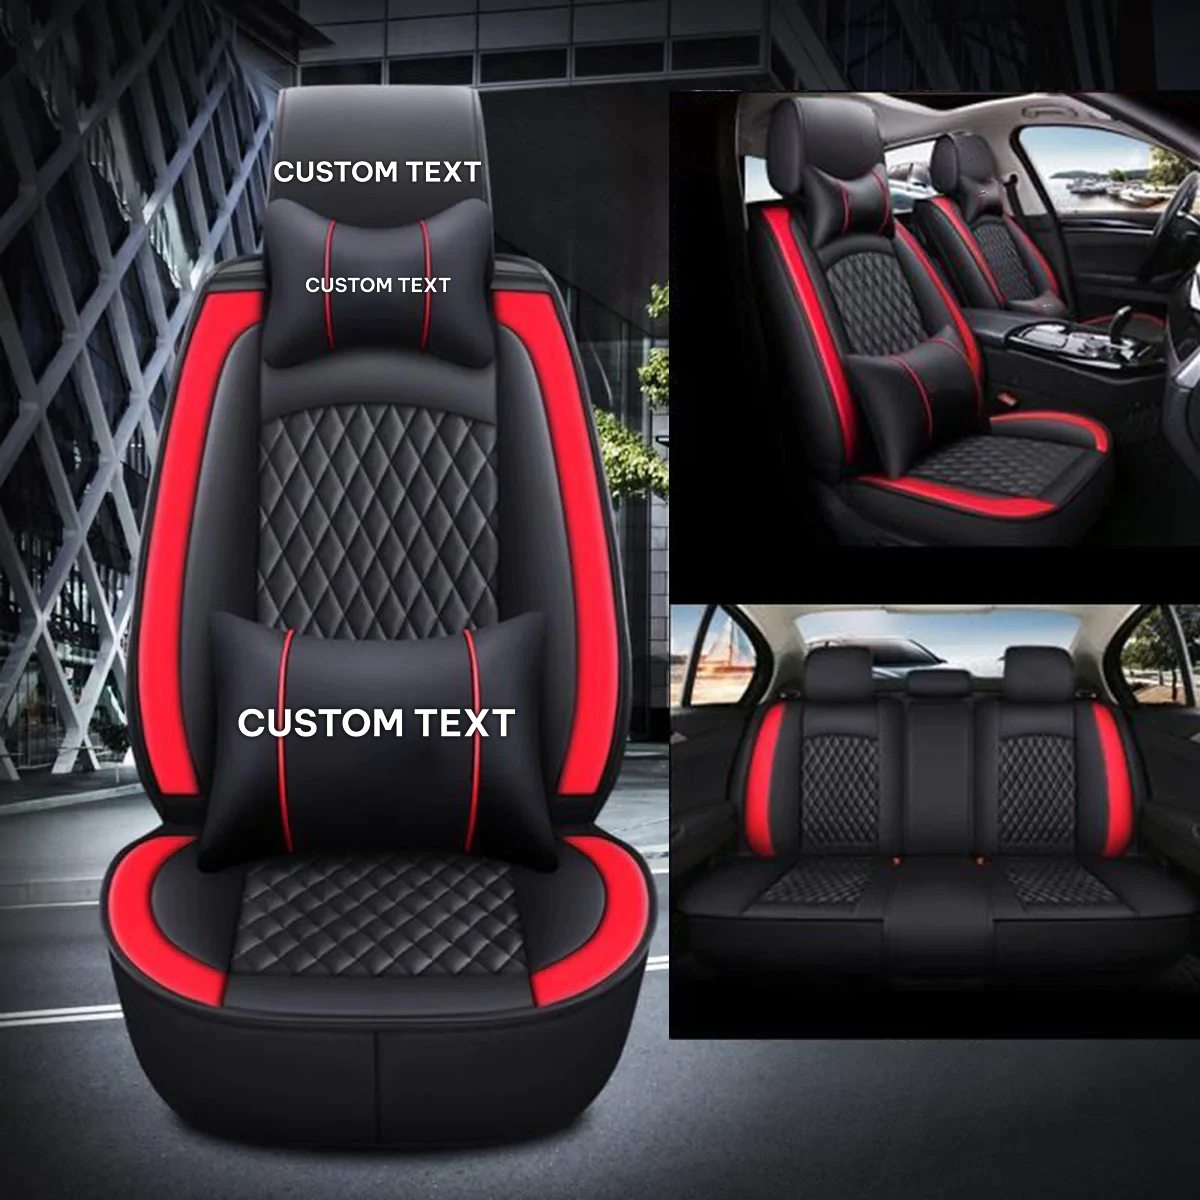 Custom Text For Seat Covers 5 Seats Full Set, Custom Fit For Your Cars, Leatherette Automotive Seat Cushion Protector Universal Fit, Vehicle Auto Interior Decor WQ13988